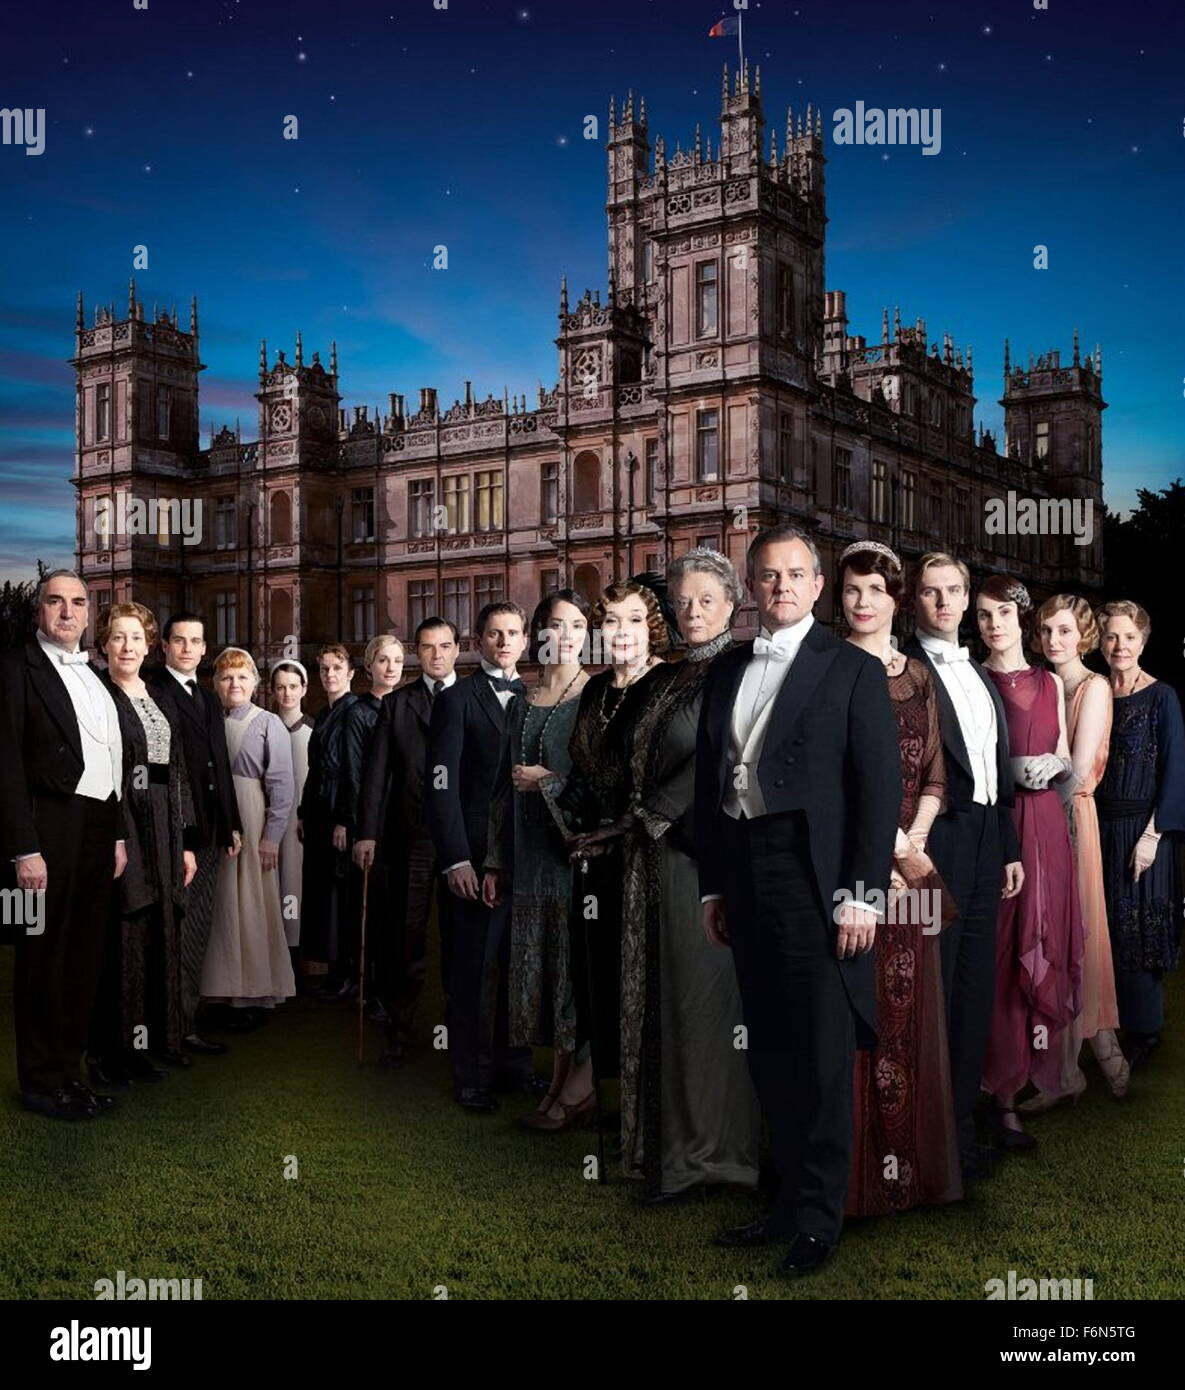 Mar 26, 2015 - London, England, United Kingdom - The next season of ITV's period drama Downton Abbey will be its last, its makers have announced. Created by Julian Fellowes, the show follows an aristocratic family's fortunes from 1912 to the mid-1920s. H. Bonneville and E. McGovern have played the Earl and Countess of Grantham since the show began in 2010. The drama has won a string of awards since its inception, including two Baftas, three Golden Globes and 11 Primetime Emmys. (Credit Image: c Carnival Film and Television/Entertainment Pictures) Stock Photo